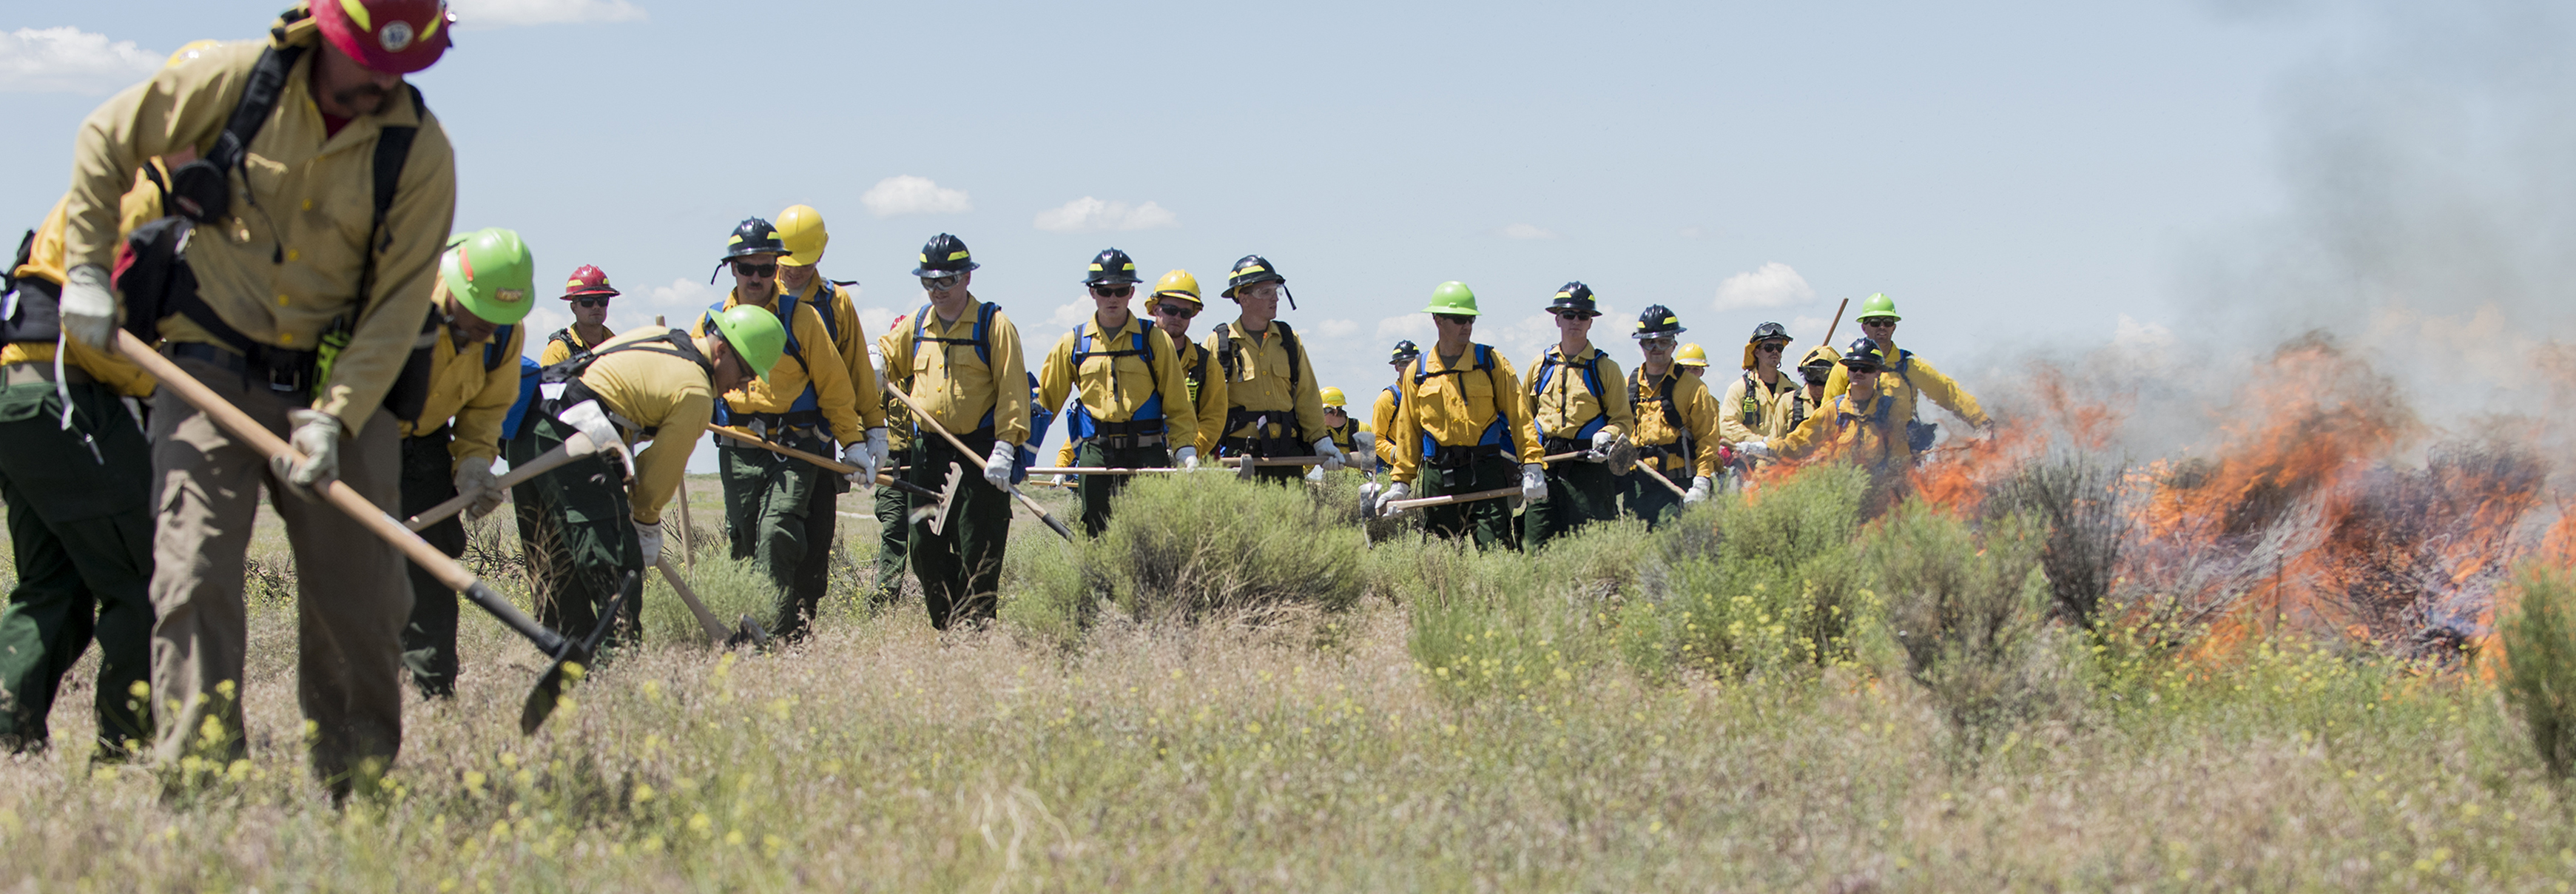 Idaho Guardsmen train to fight wildland fires earning Red Card certifications